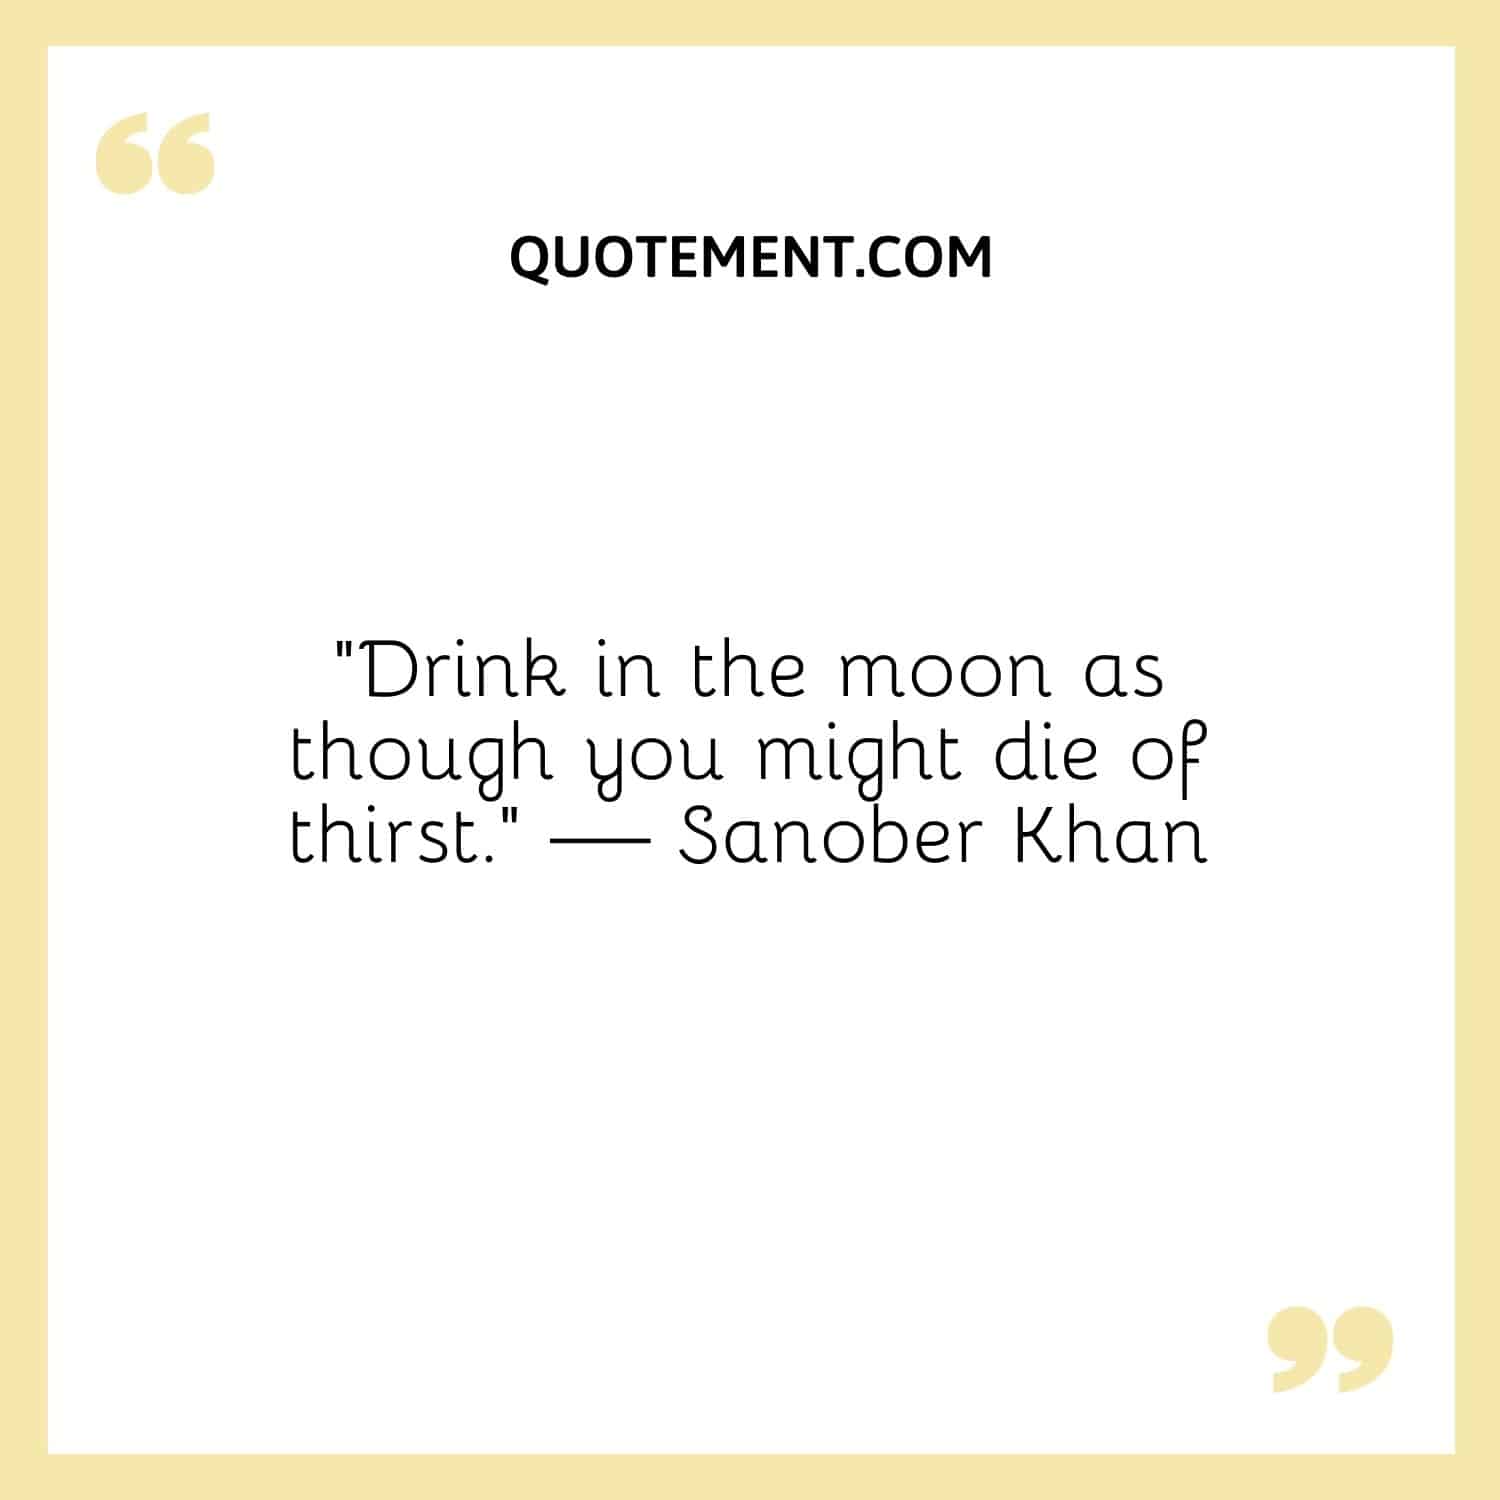 “Drink in the moon as though you might die of thirst.” — Sanober Khan